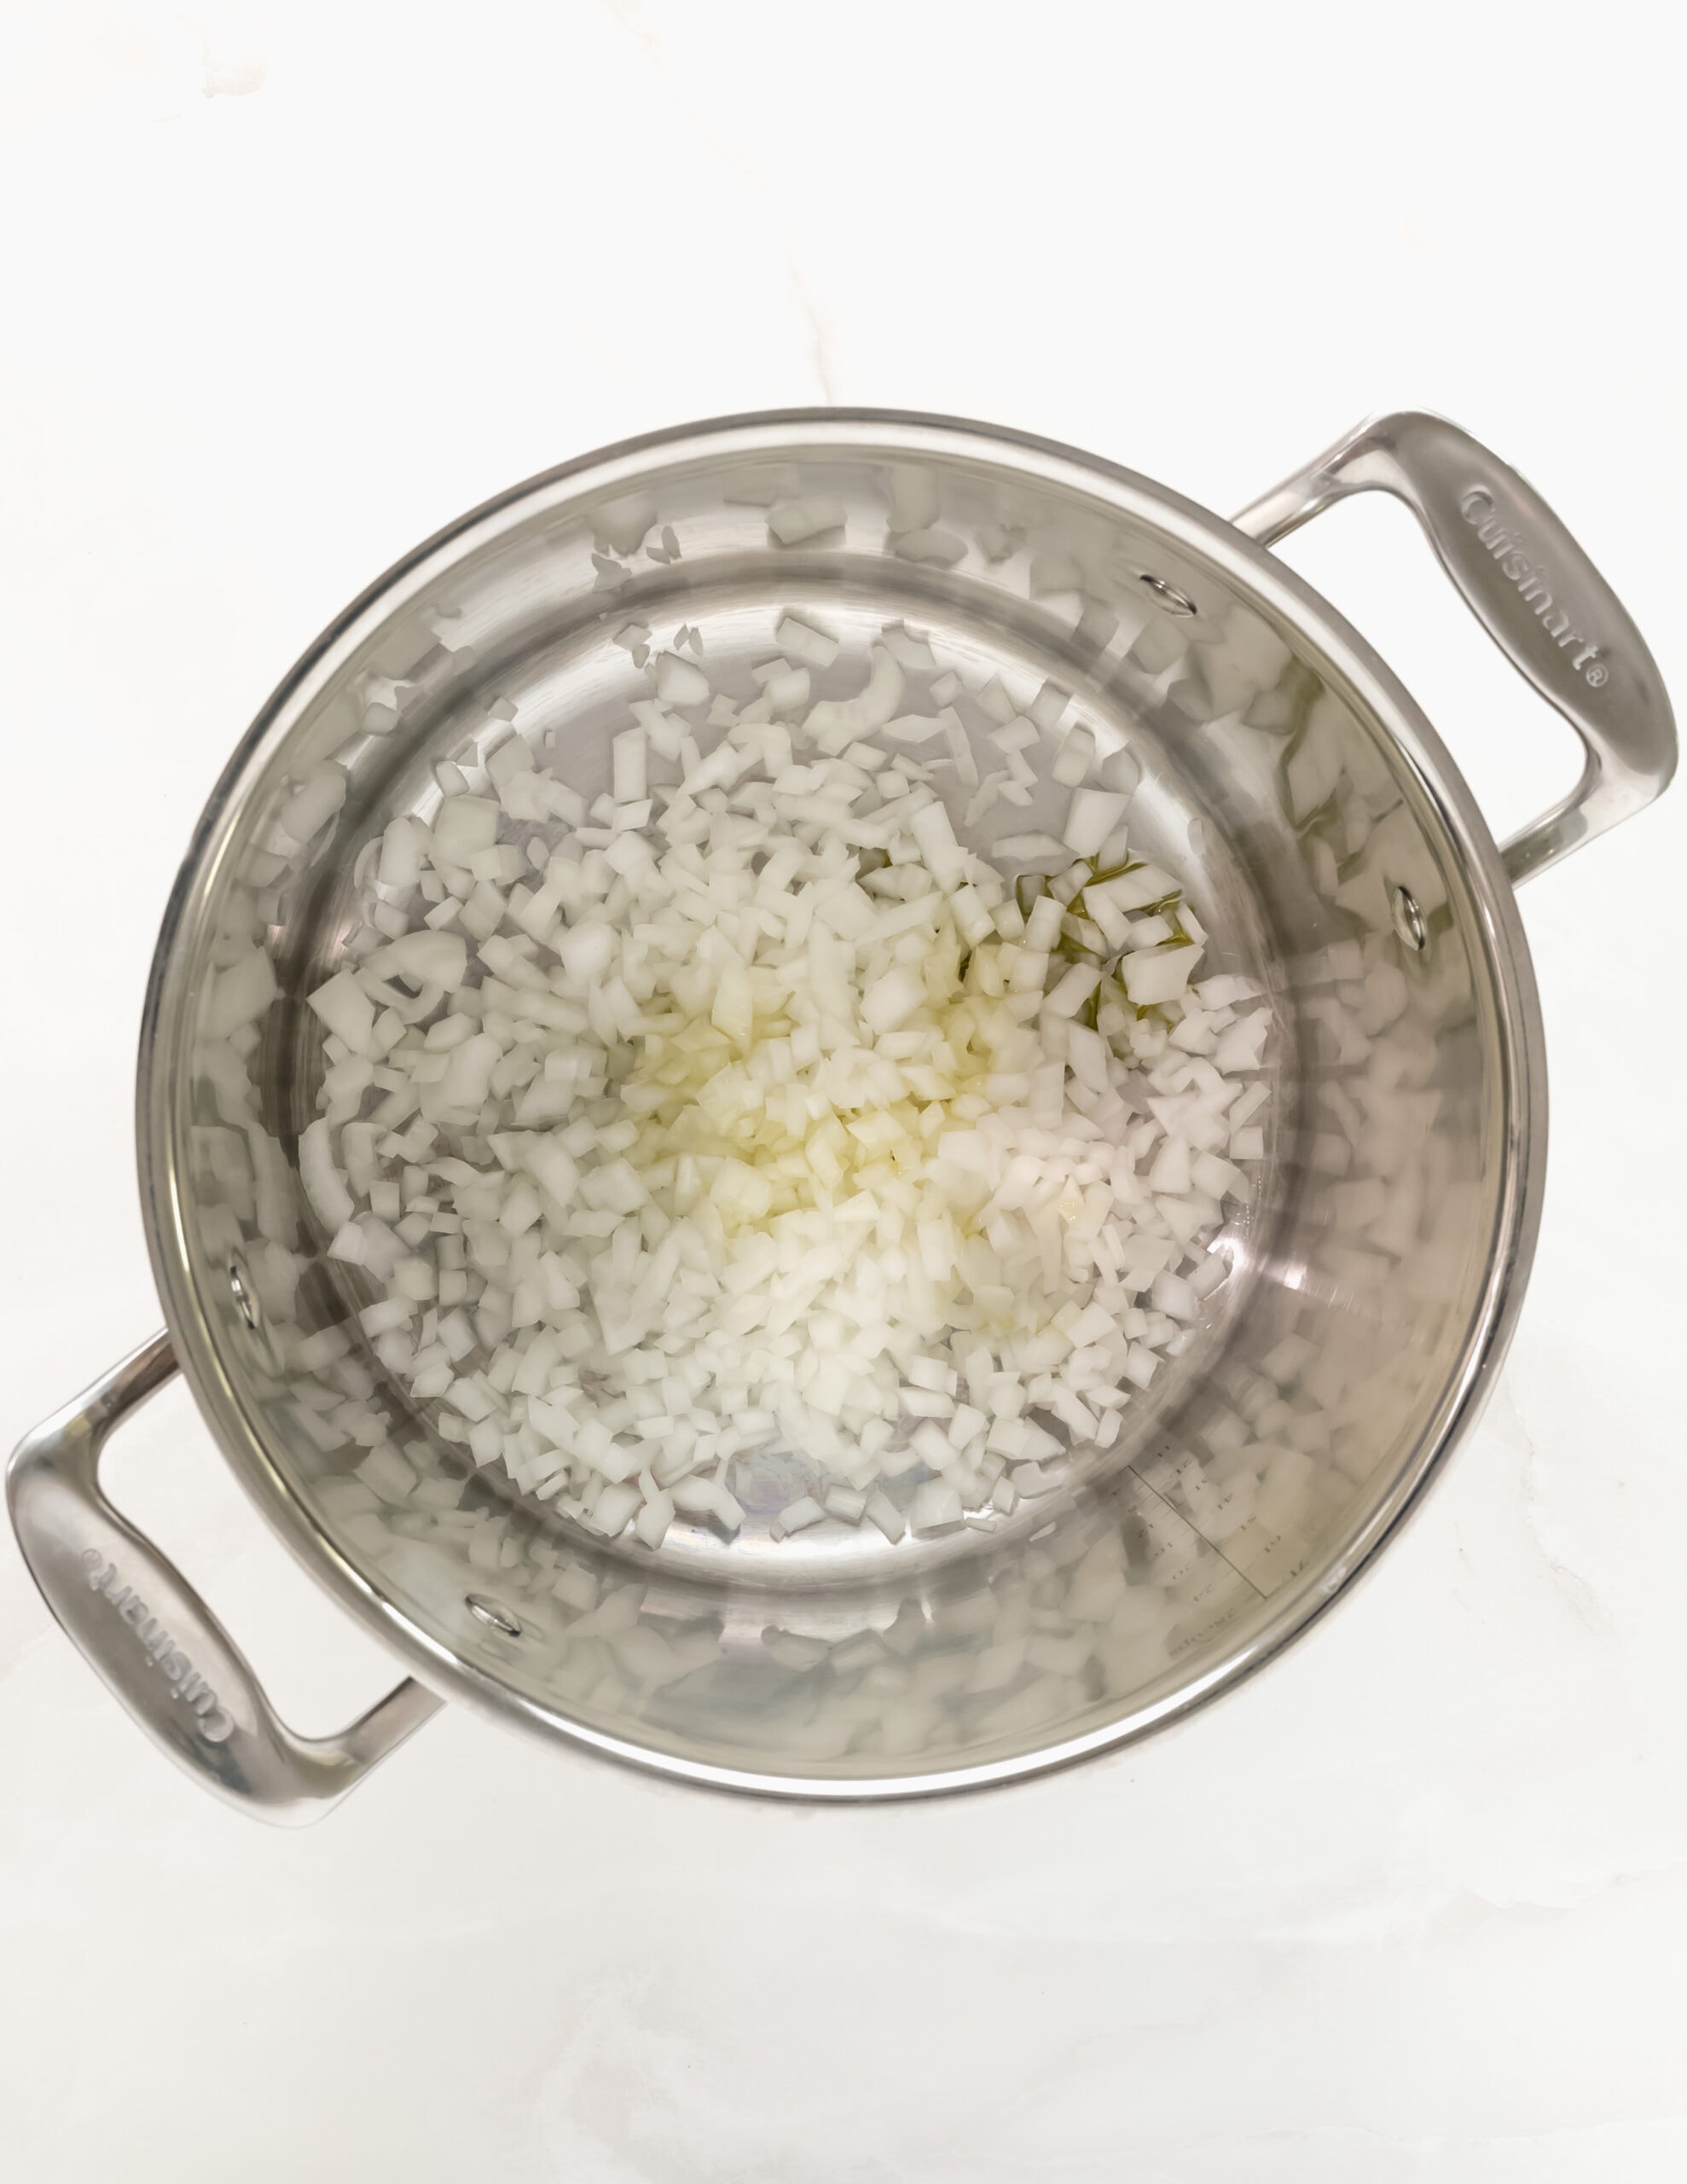 Stainless steel pot with diced onions and oil.